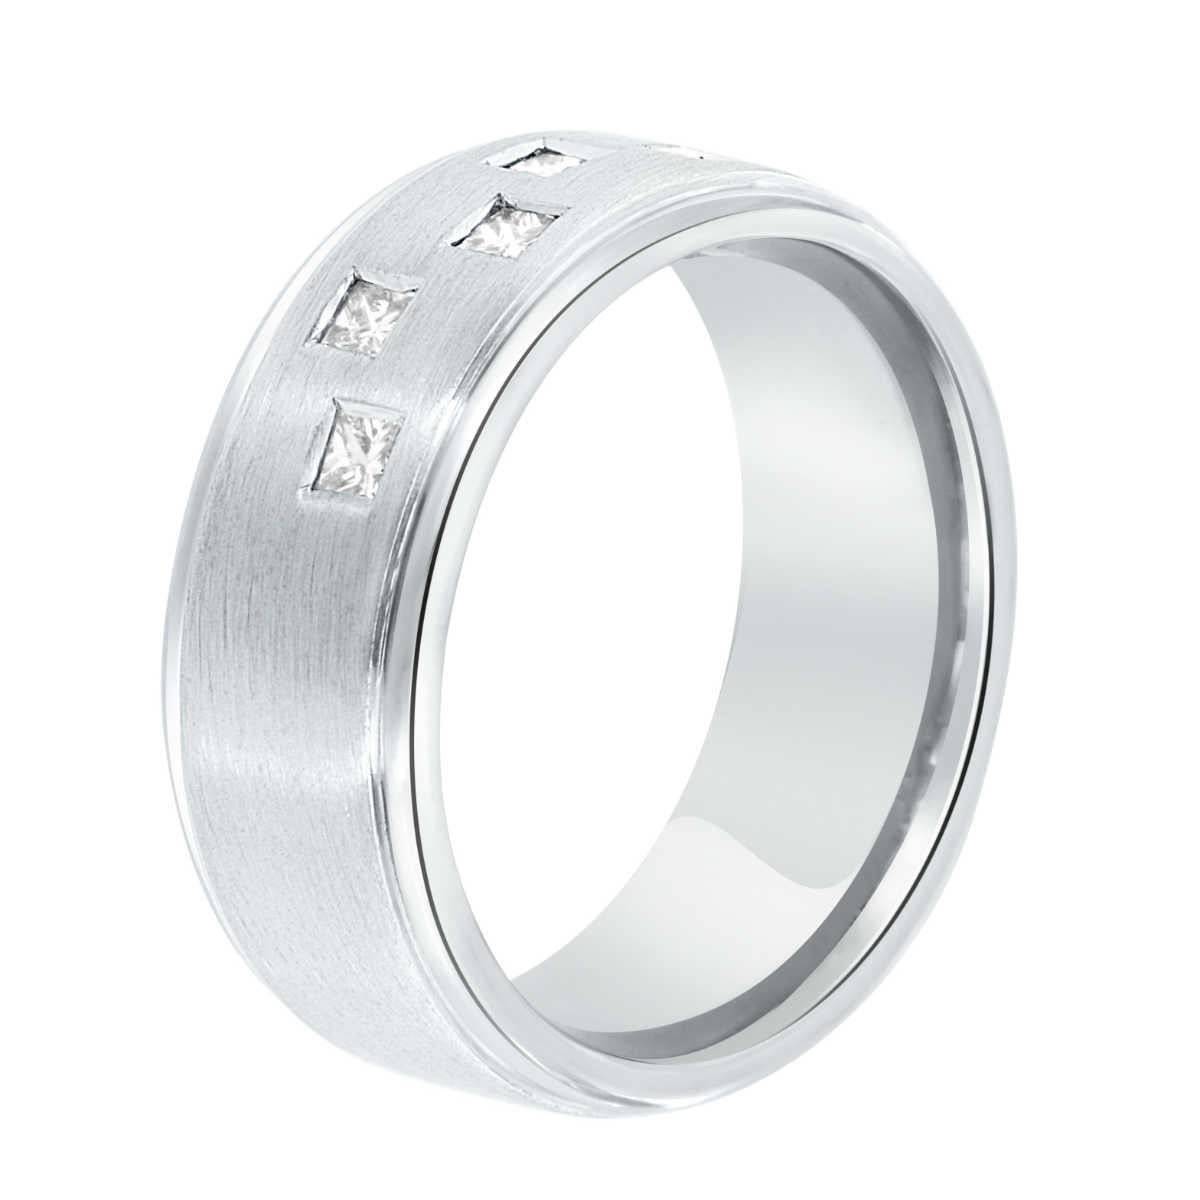 This 18k white gold handcrafted Men's band showcase six (6) perfectly matched Princess cut diamonds scattered on a nine (9) MM wide band. The band's thin edges are polished, and the center is in a satin finish.
Diamond Weight : 0.43 Carat
Diamond